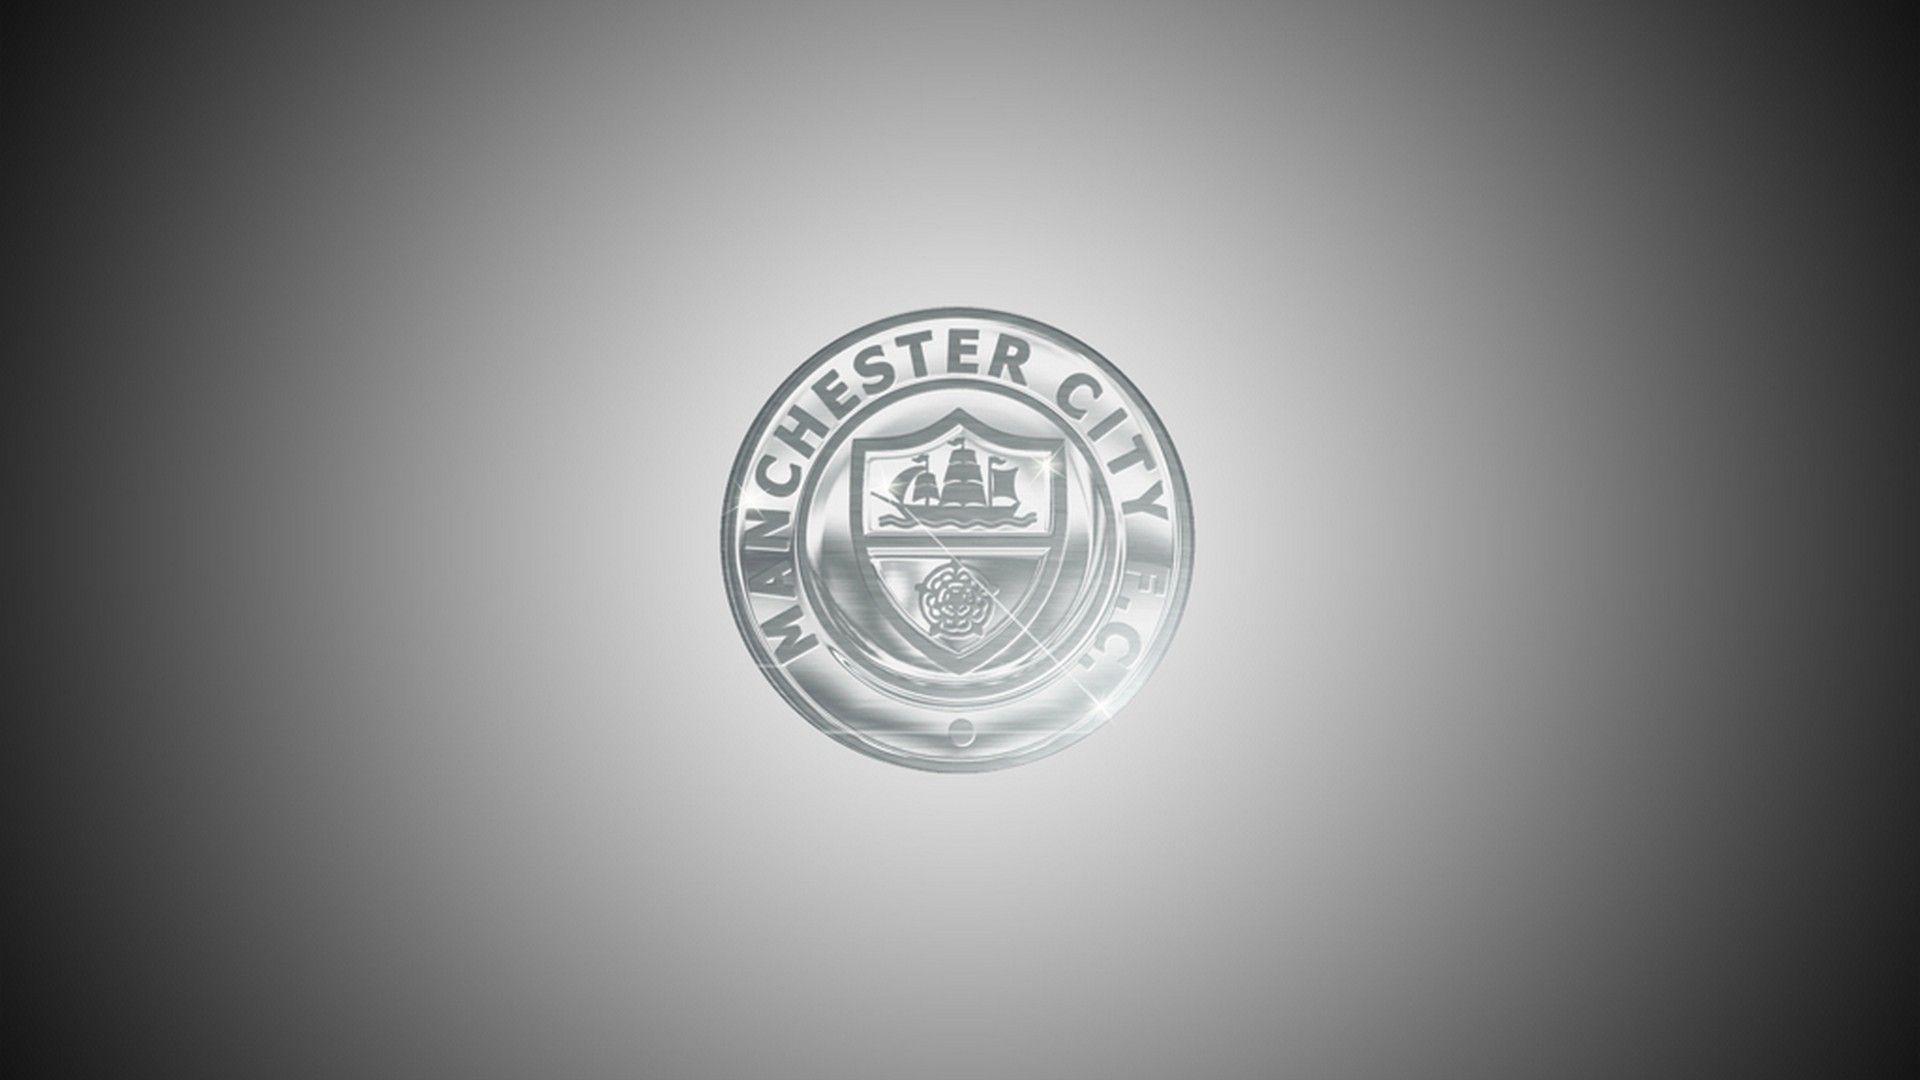 HD Manchester City Background. City background, Manchester city